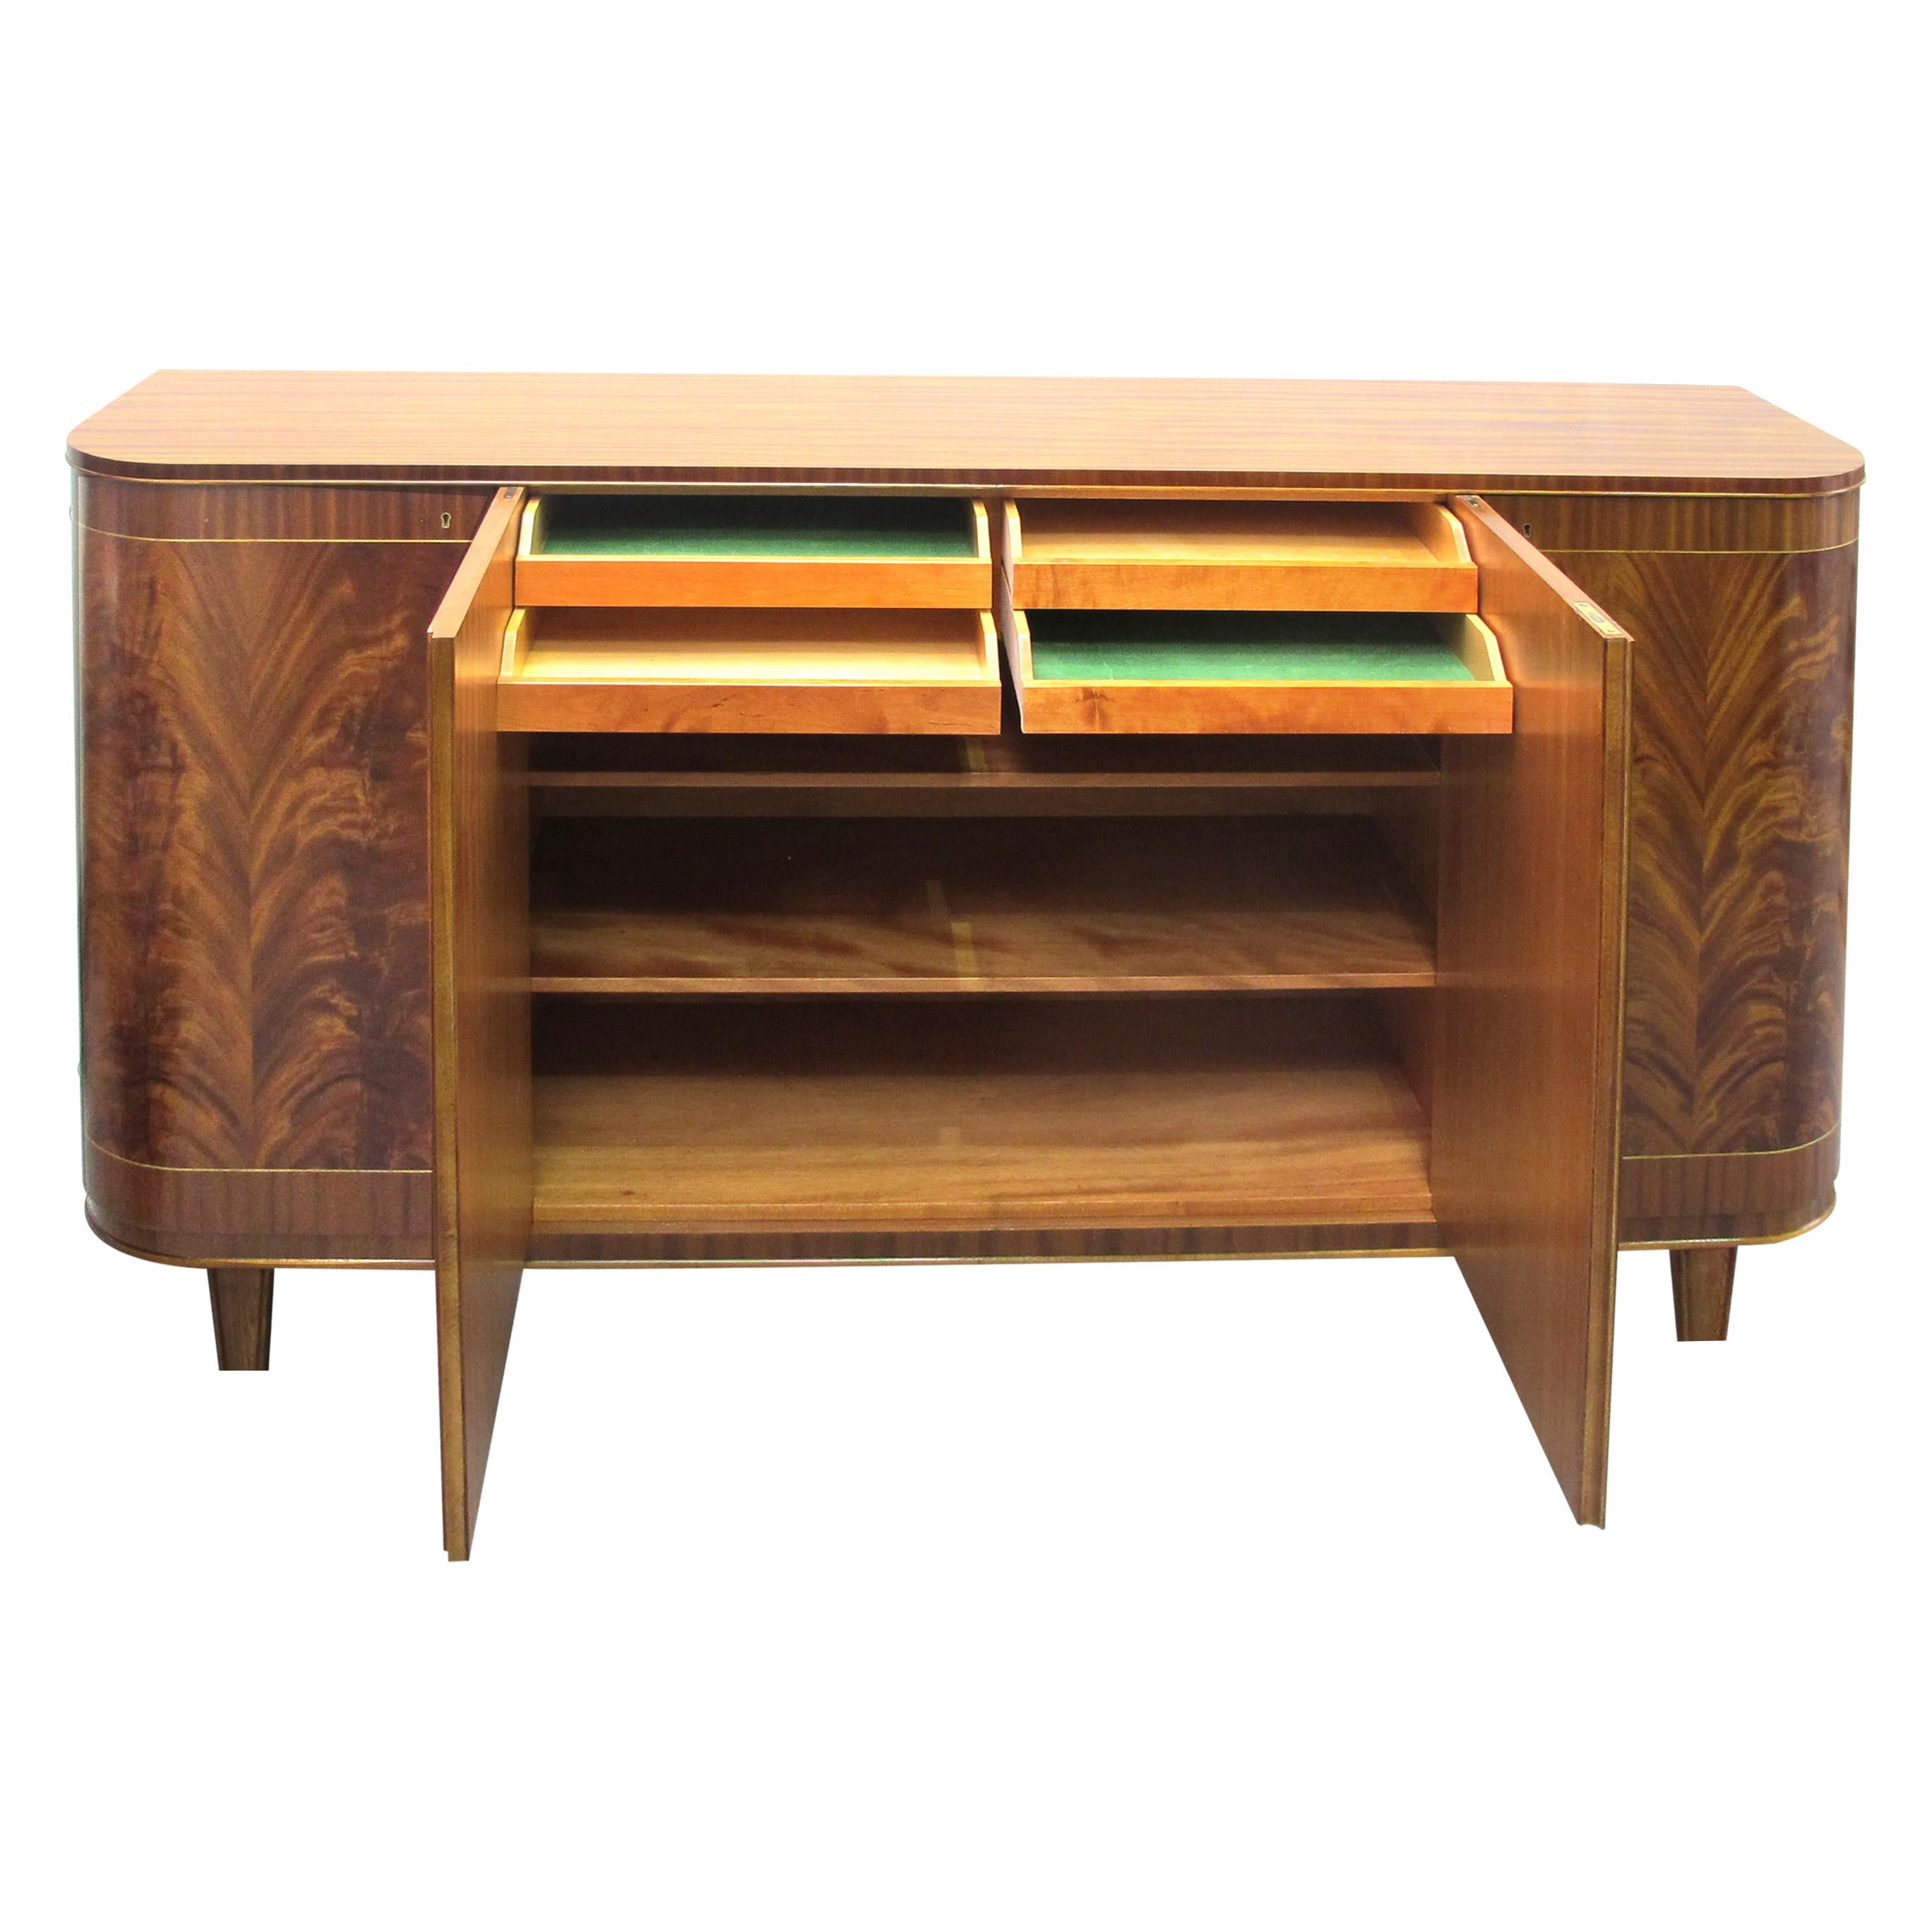 Mid-20th Century 1940s Large Swedish Cabinet-Credenza with Mahogany Flame Veneers For Sale